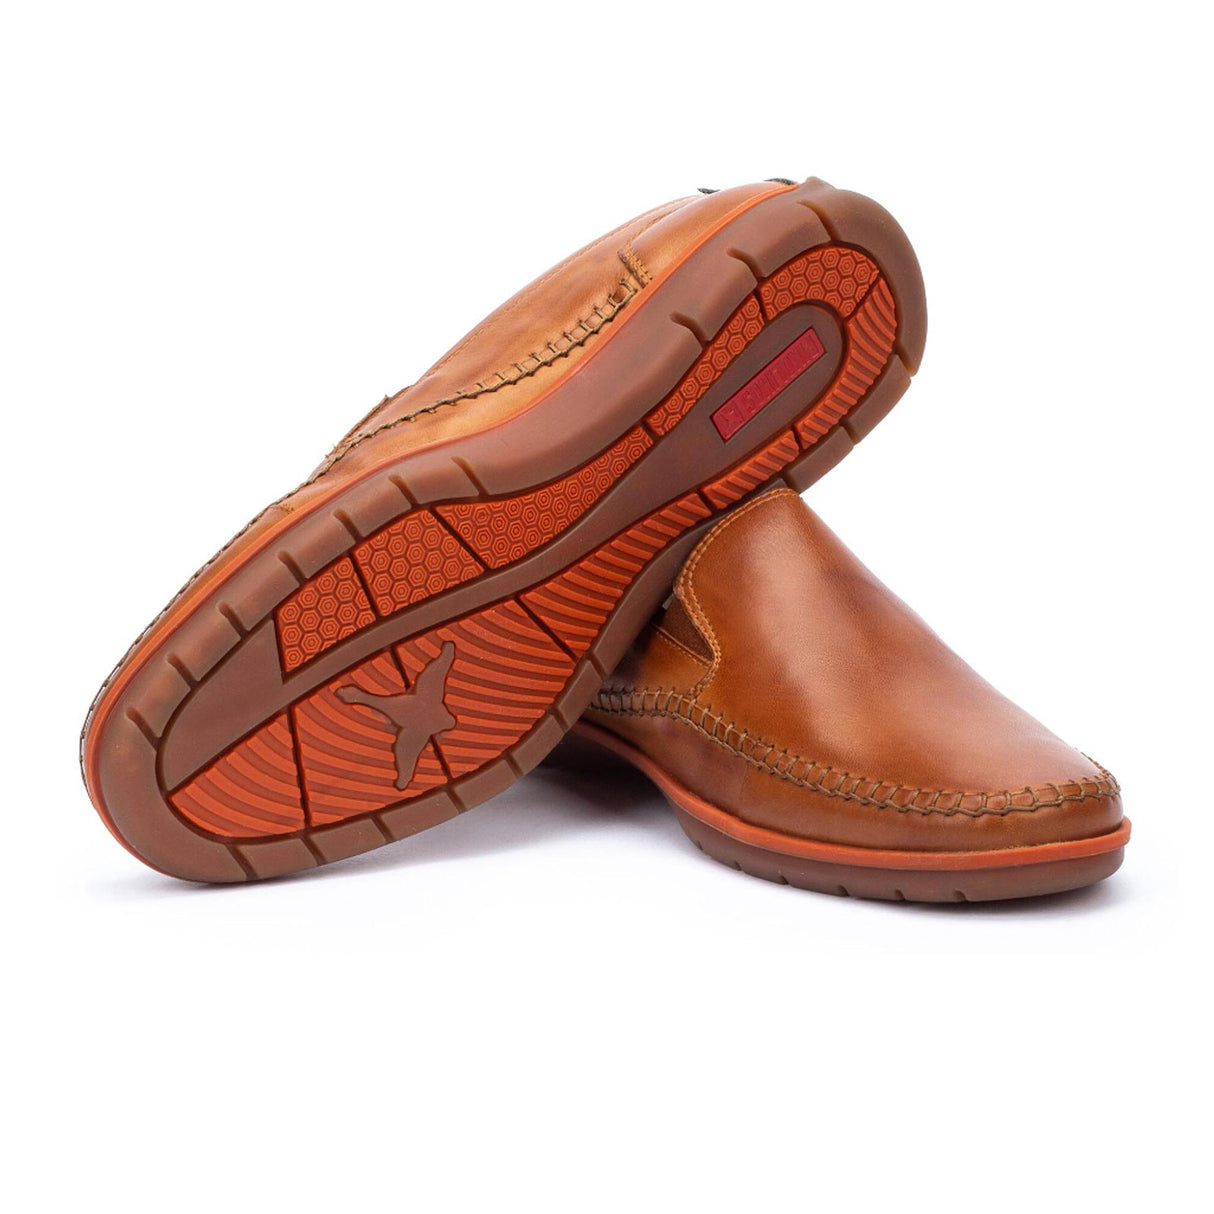 Pikolinos Marbella M9A-3111 Slip On Loafer (Men) - Brandy Dress-Casual - Loafers - The Heel Shoe Fitters